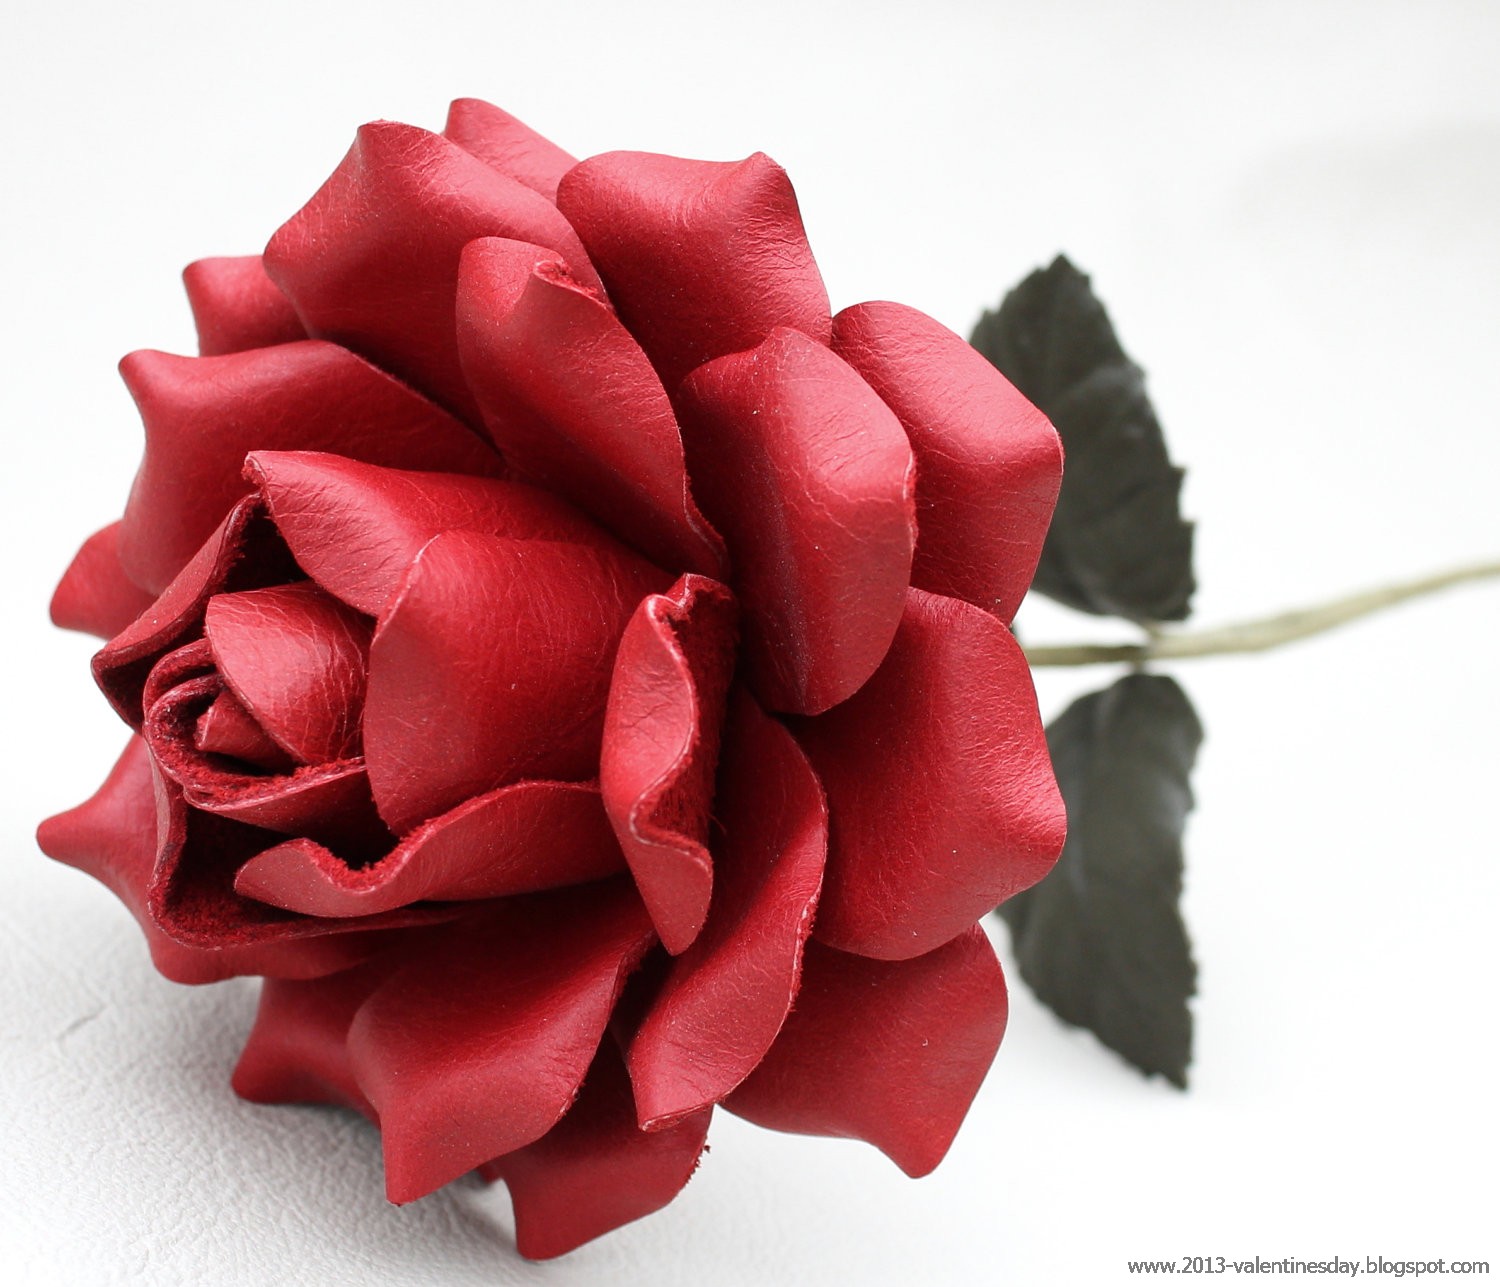 18. New Latest Happy Rose Day 2014 Hd Wallpapers